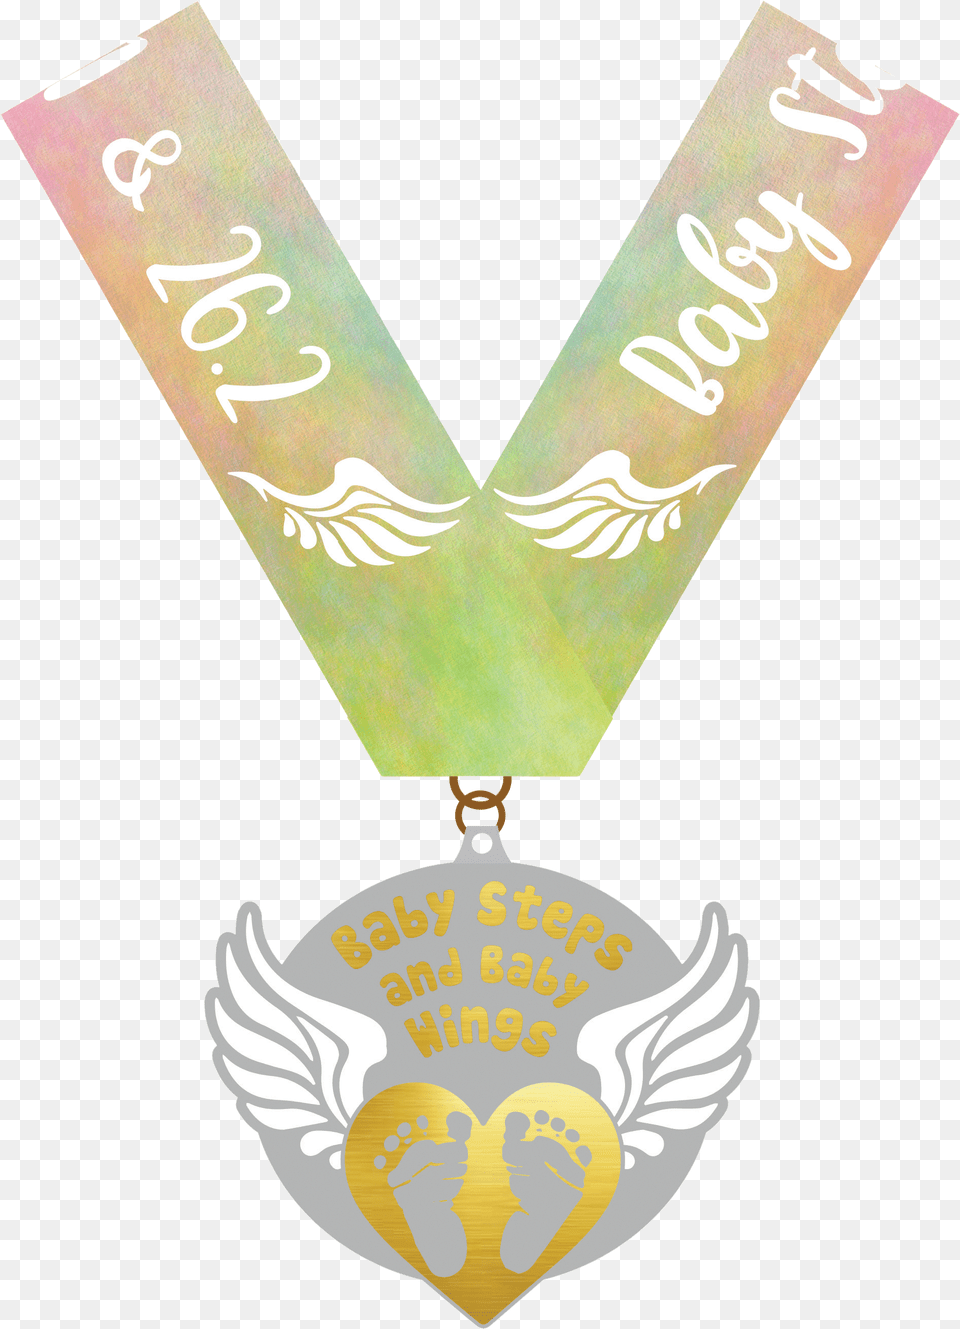 Baby Steps And Baby Wings 1 Mile 5k 10k Baby Steps And Baby Wings 1 Mile 5k 10k 131, Gold, Accessories, Business Card, Paper Free Png Download